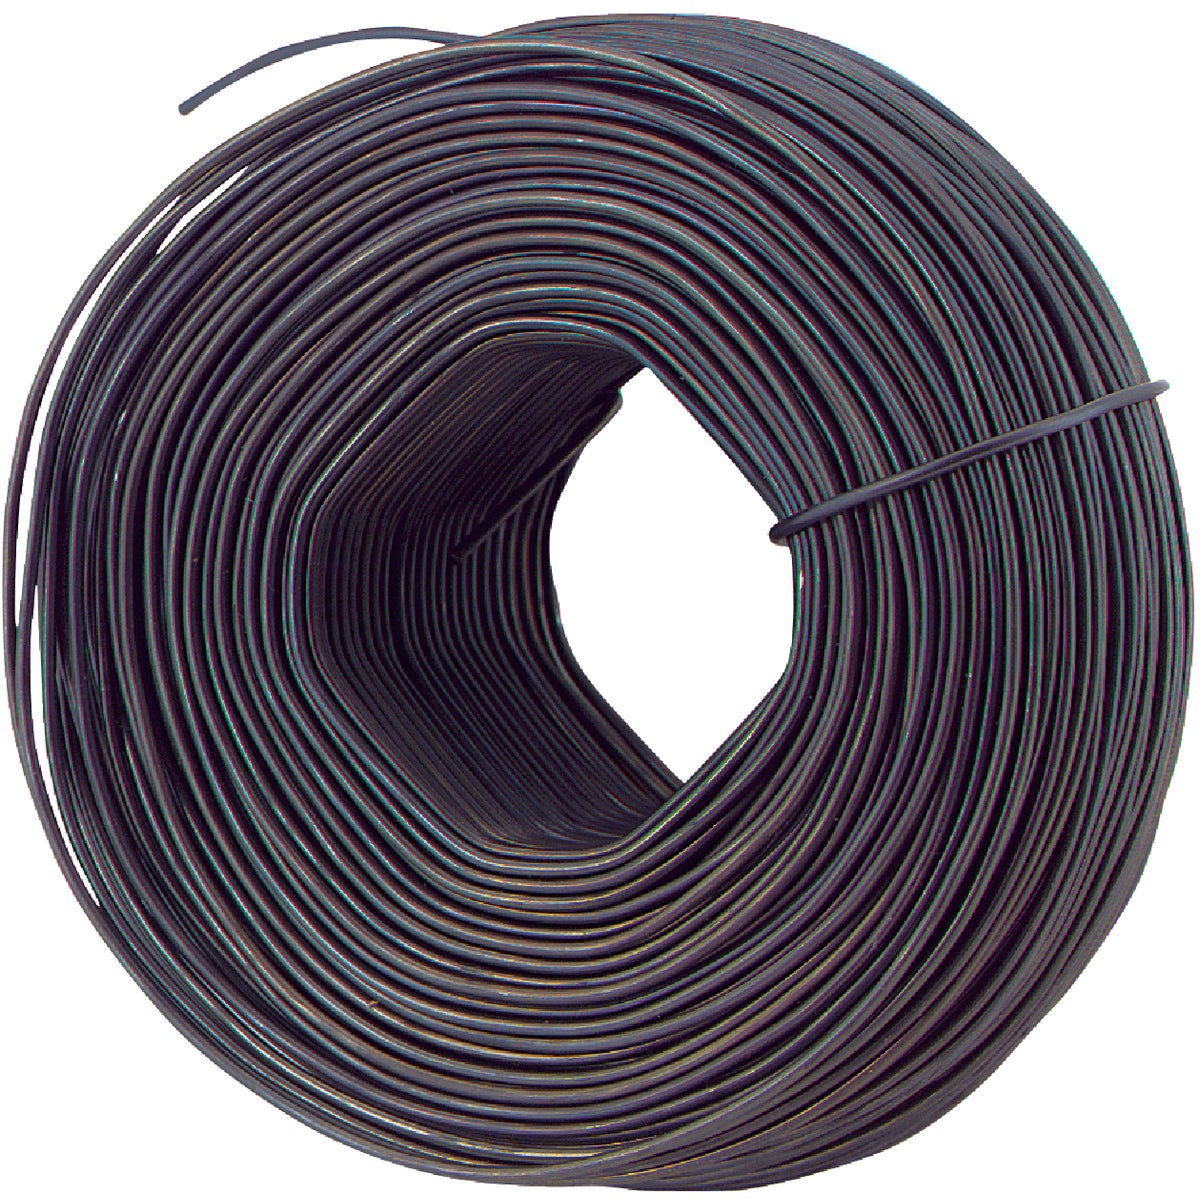 Item 704628, Rebar tie wire. Plastic coated coil wire.